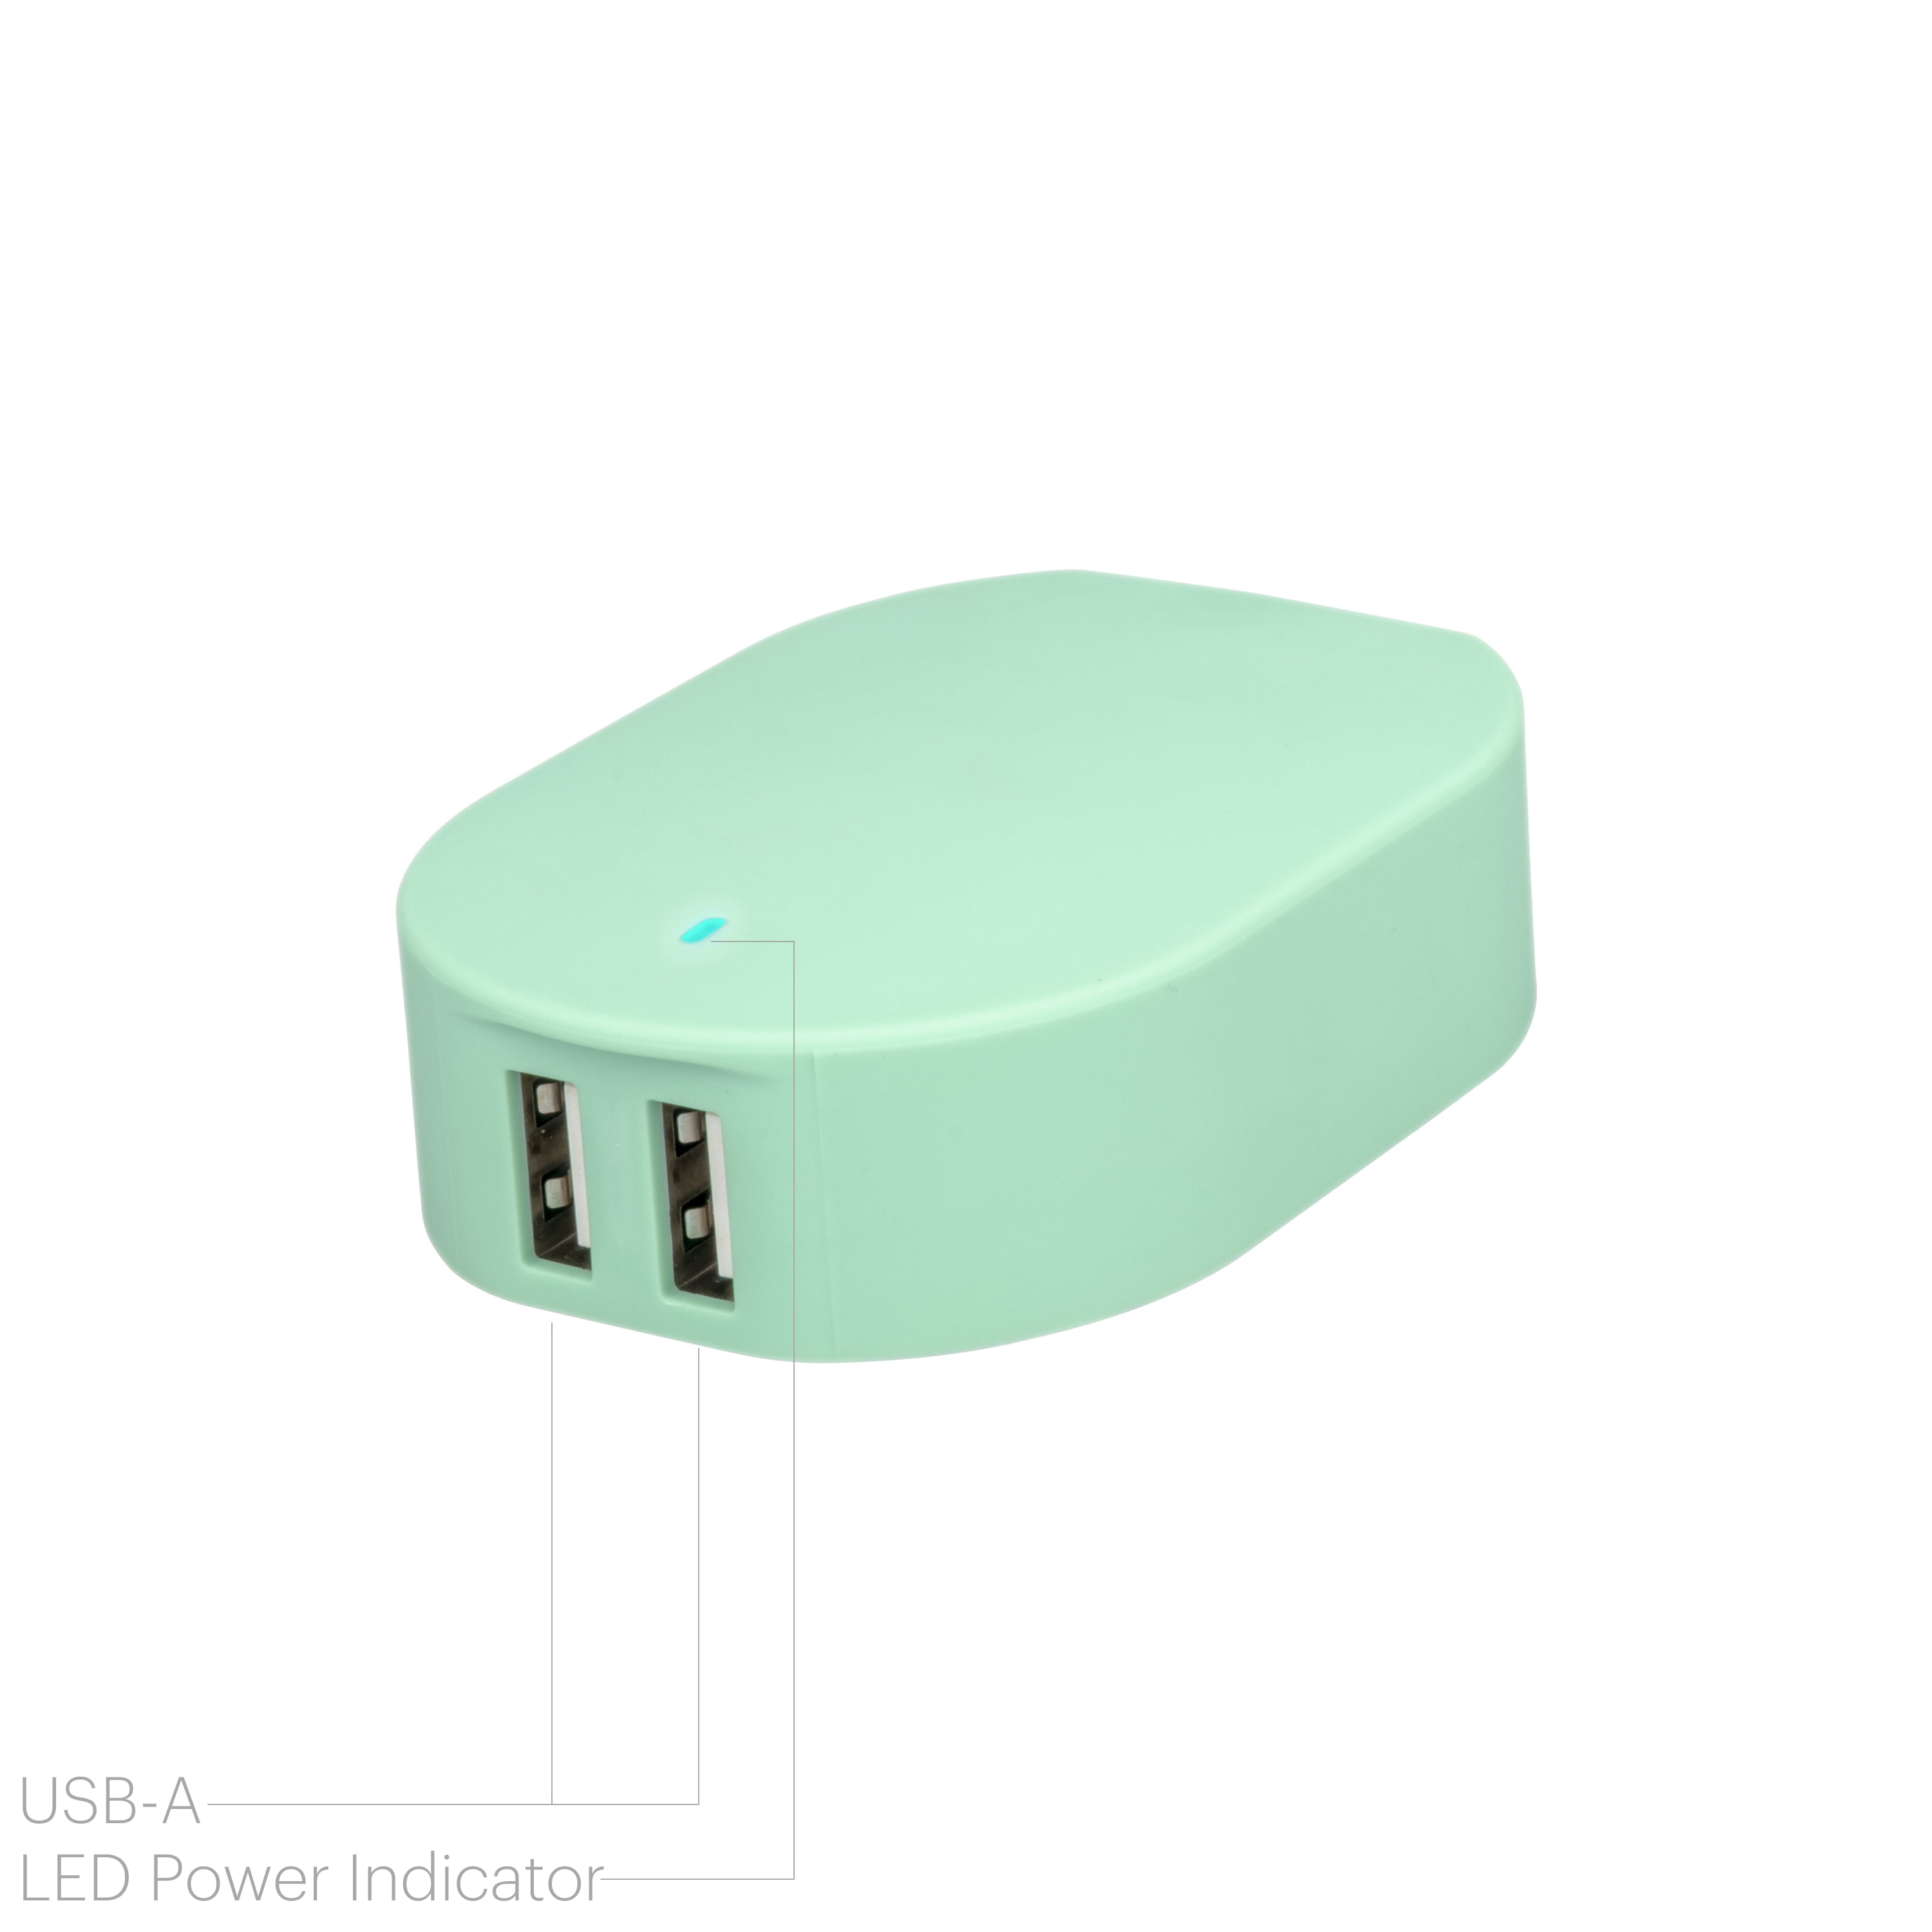 onn. 4.8A Dual-Port USB Wall Charger, Foldable Plug, Compatible for iPhone, iPad and Android Smartphones